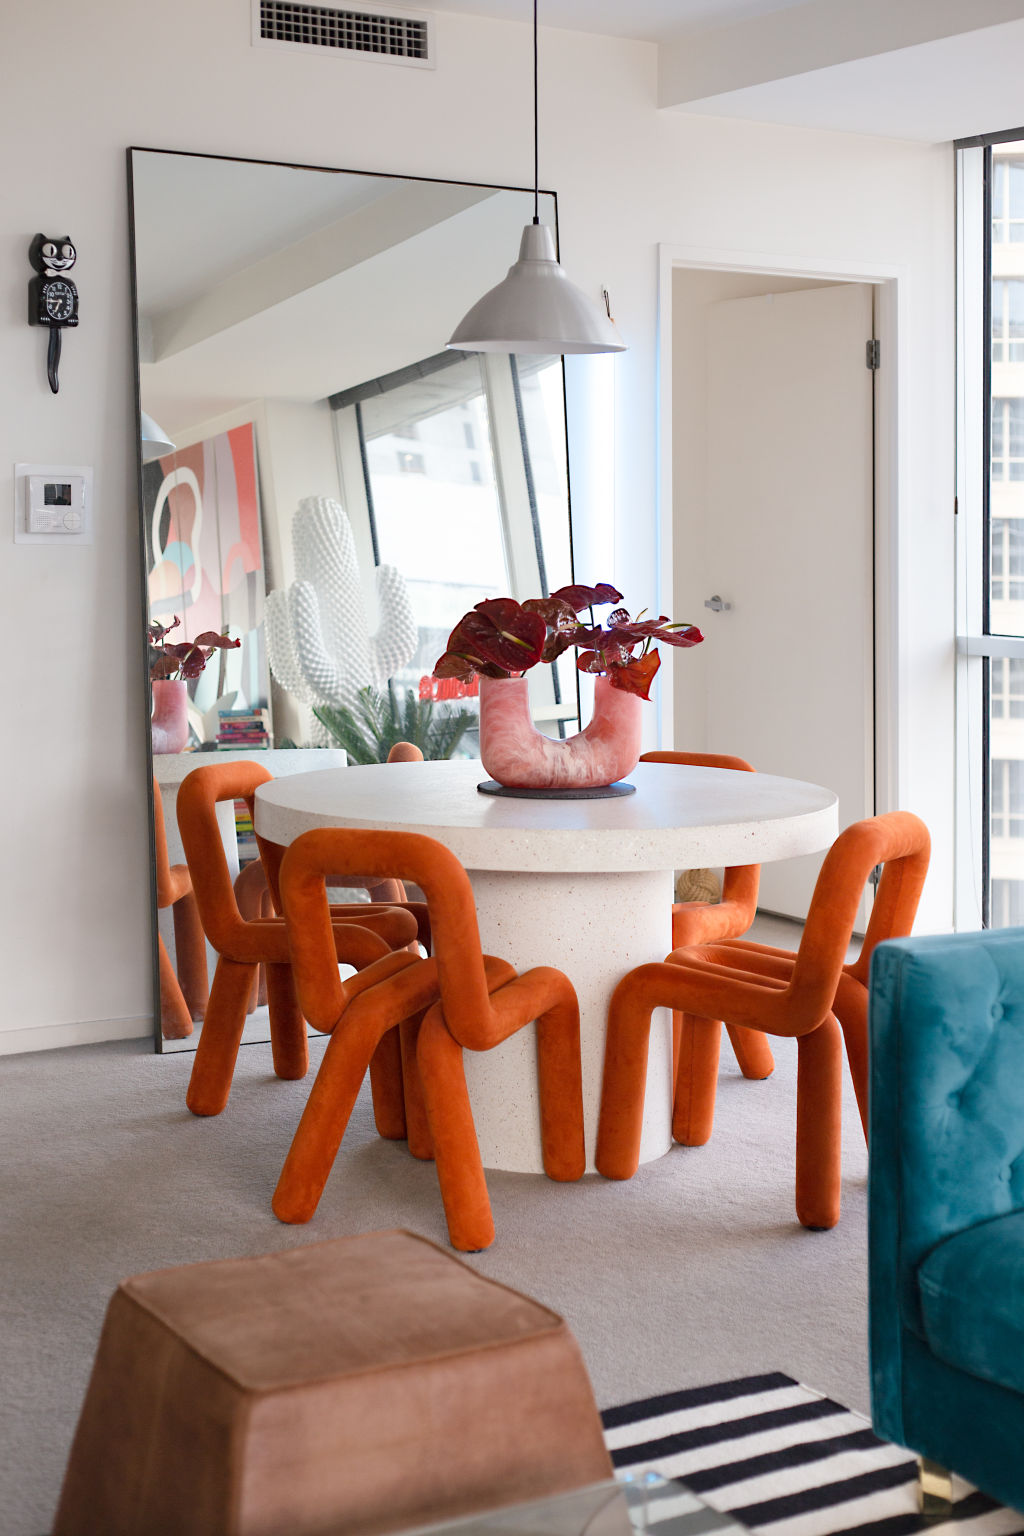 Splurge items include replica Bold Chairs made from steel and sponge, and a Coco Republic dining table. Photo: Emma Byrnes